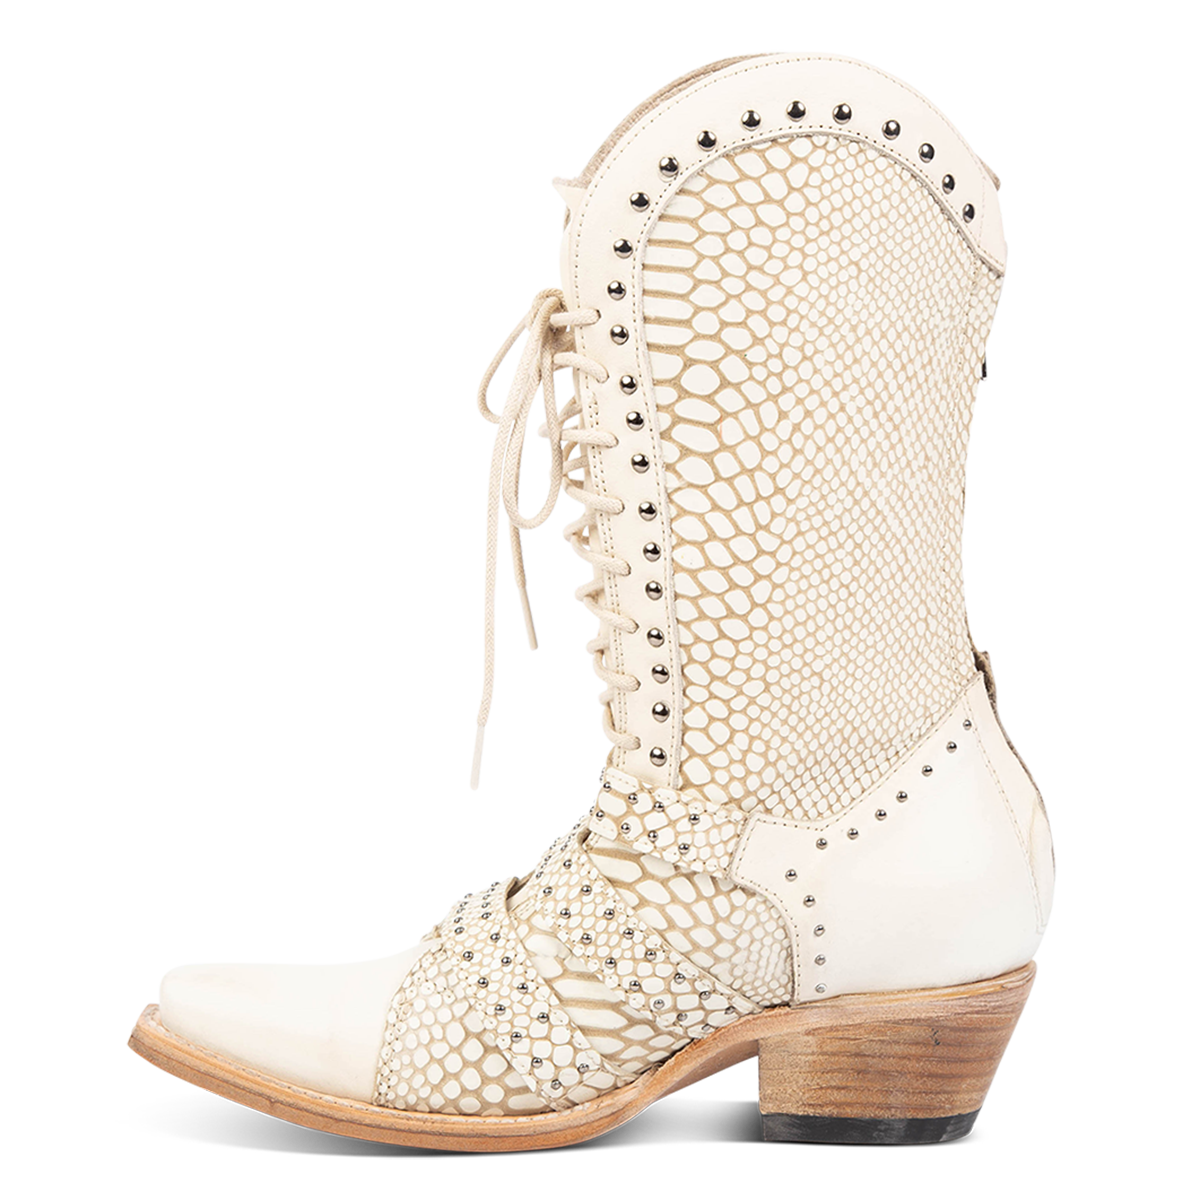 Inside view showing leather accents on FREEBIRD women's Winnie White Snake western boot